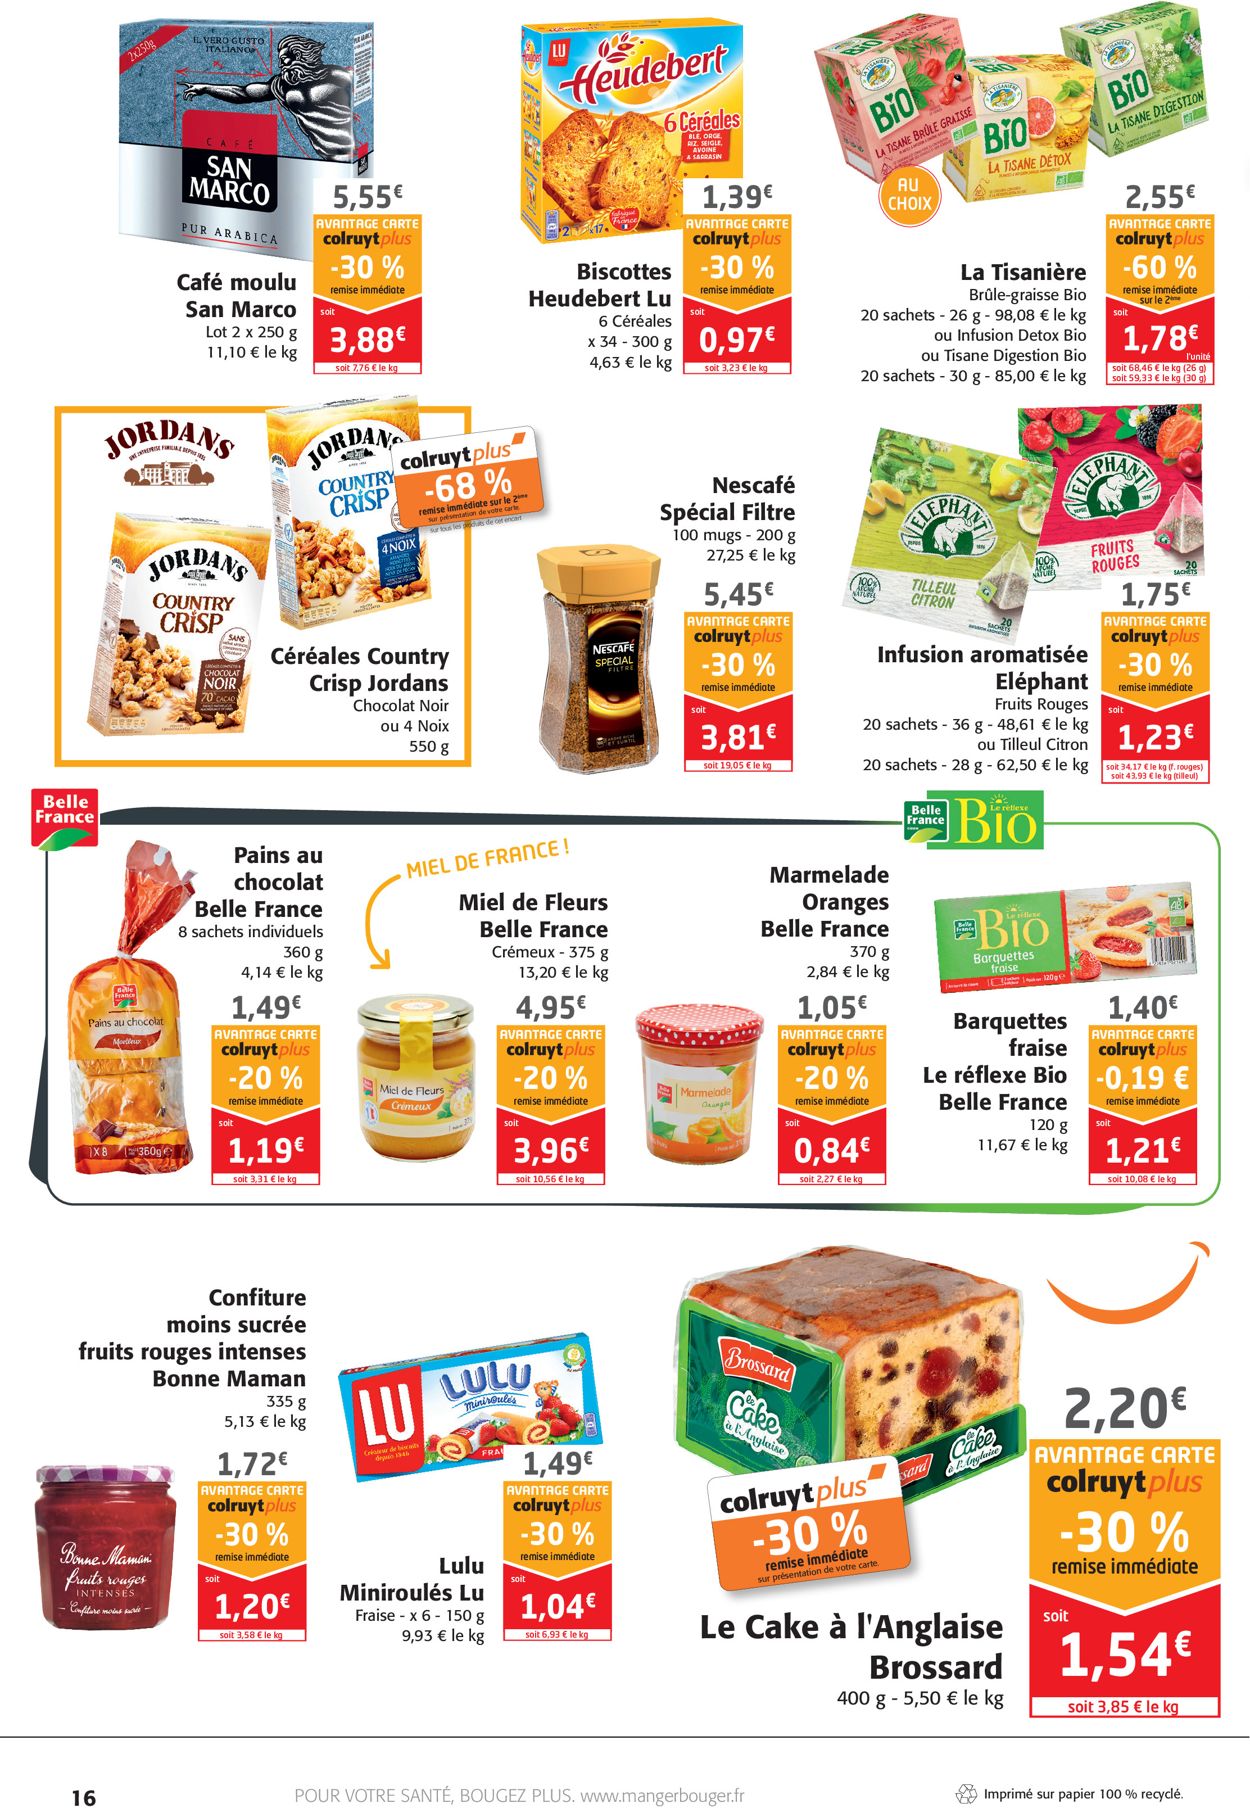 Colruyt BLACK WEEK 2021 Catalogue - 17.11-28.11.2021 (Page 16)